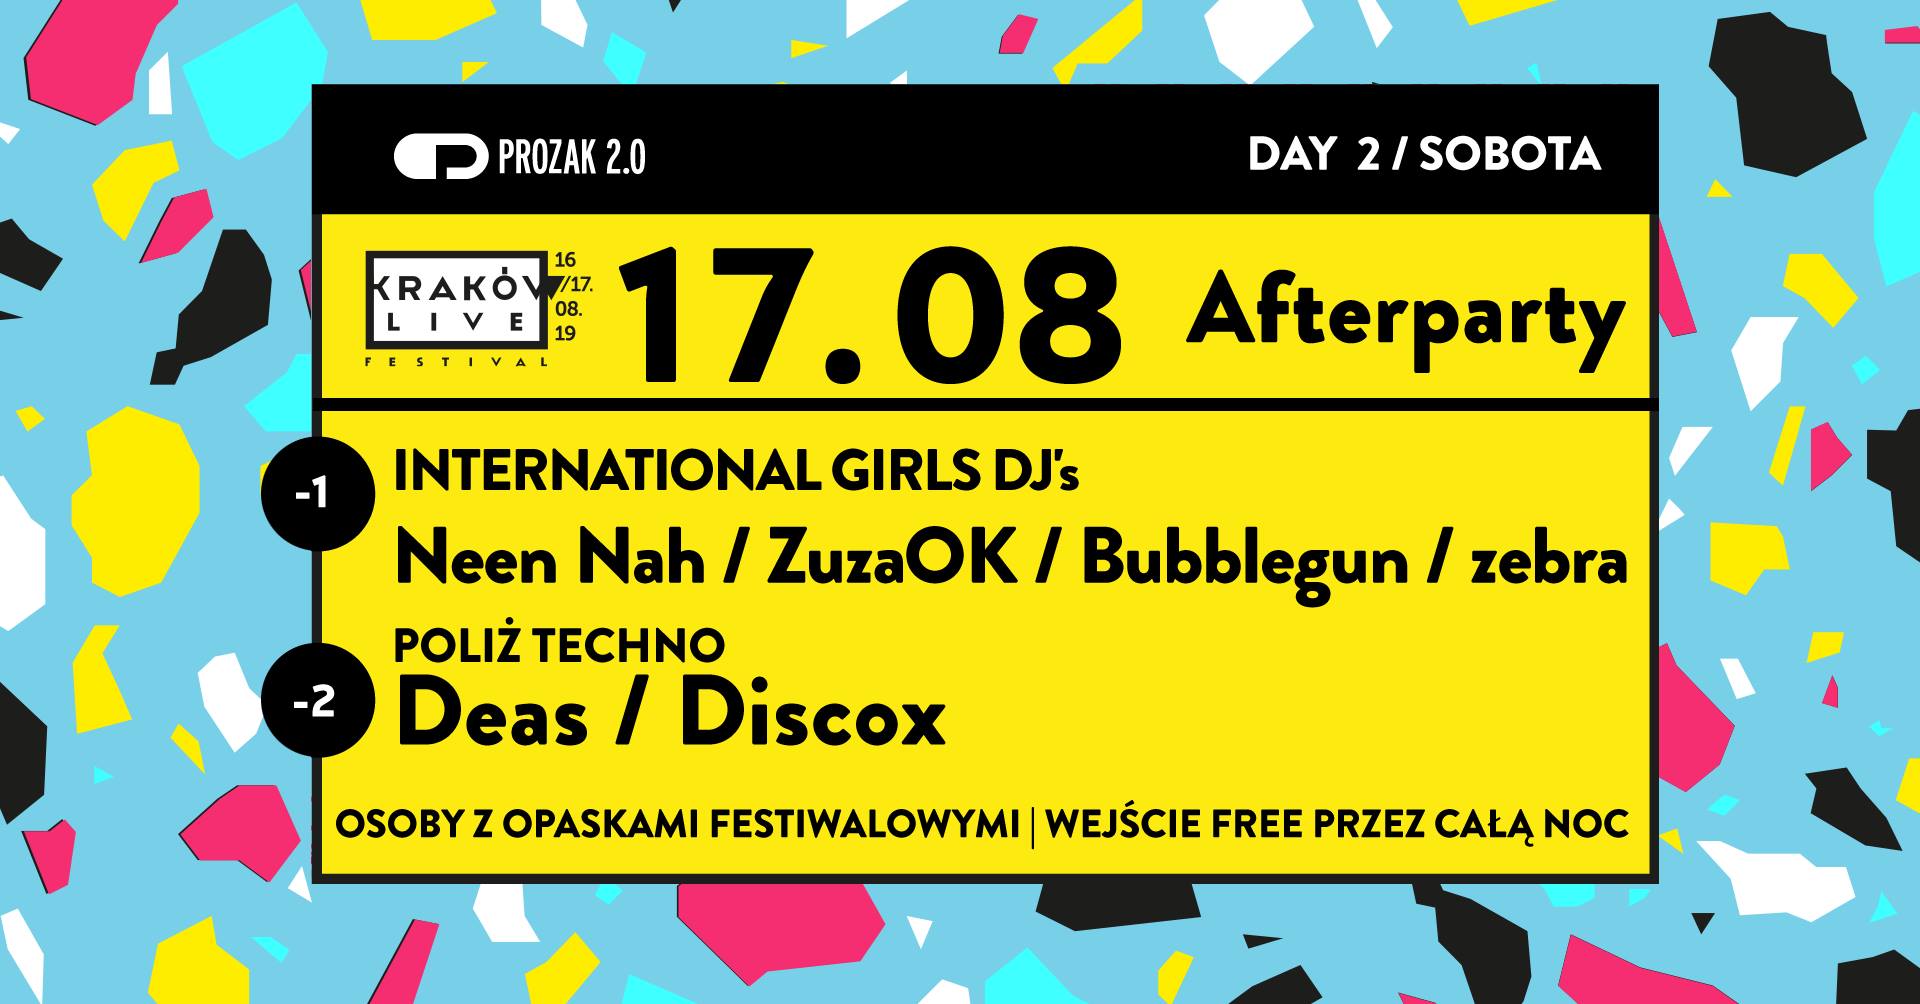 Kraków Live Festival 2019 Official Afterparty Day 2